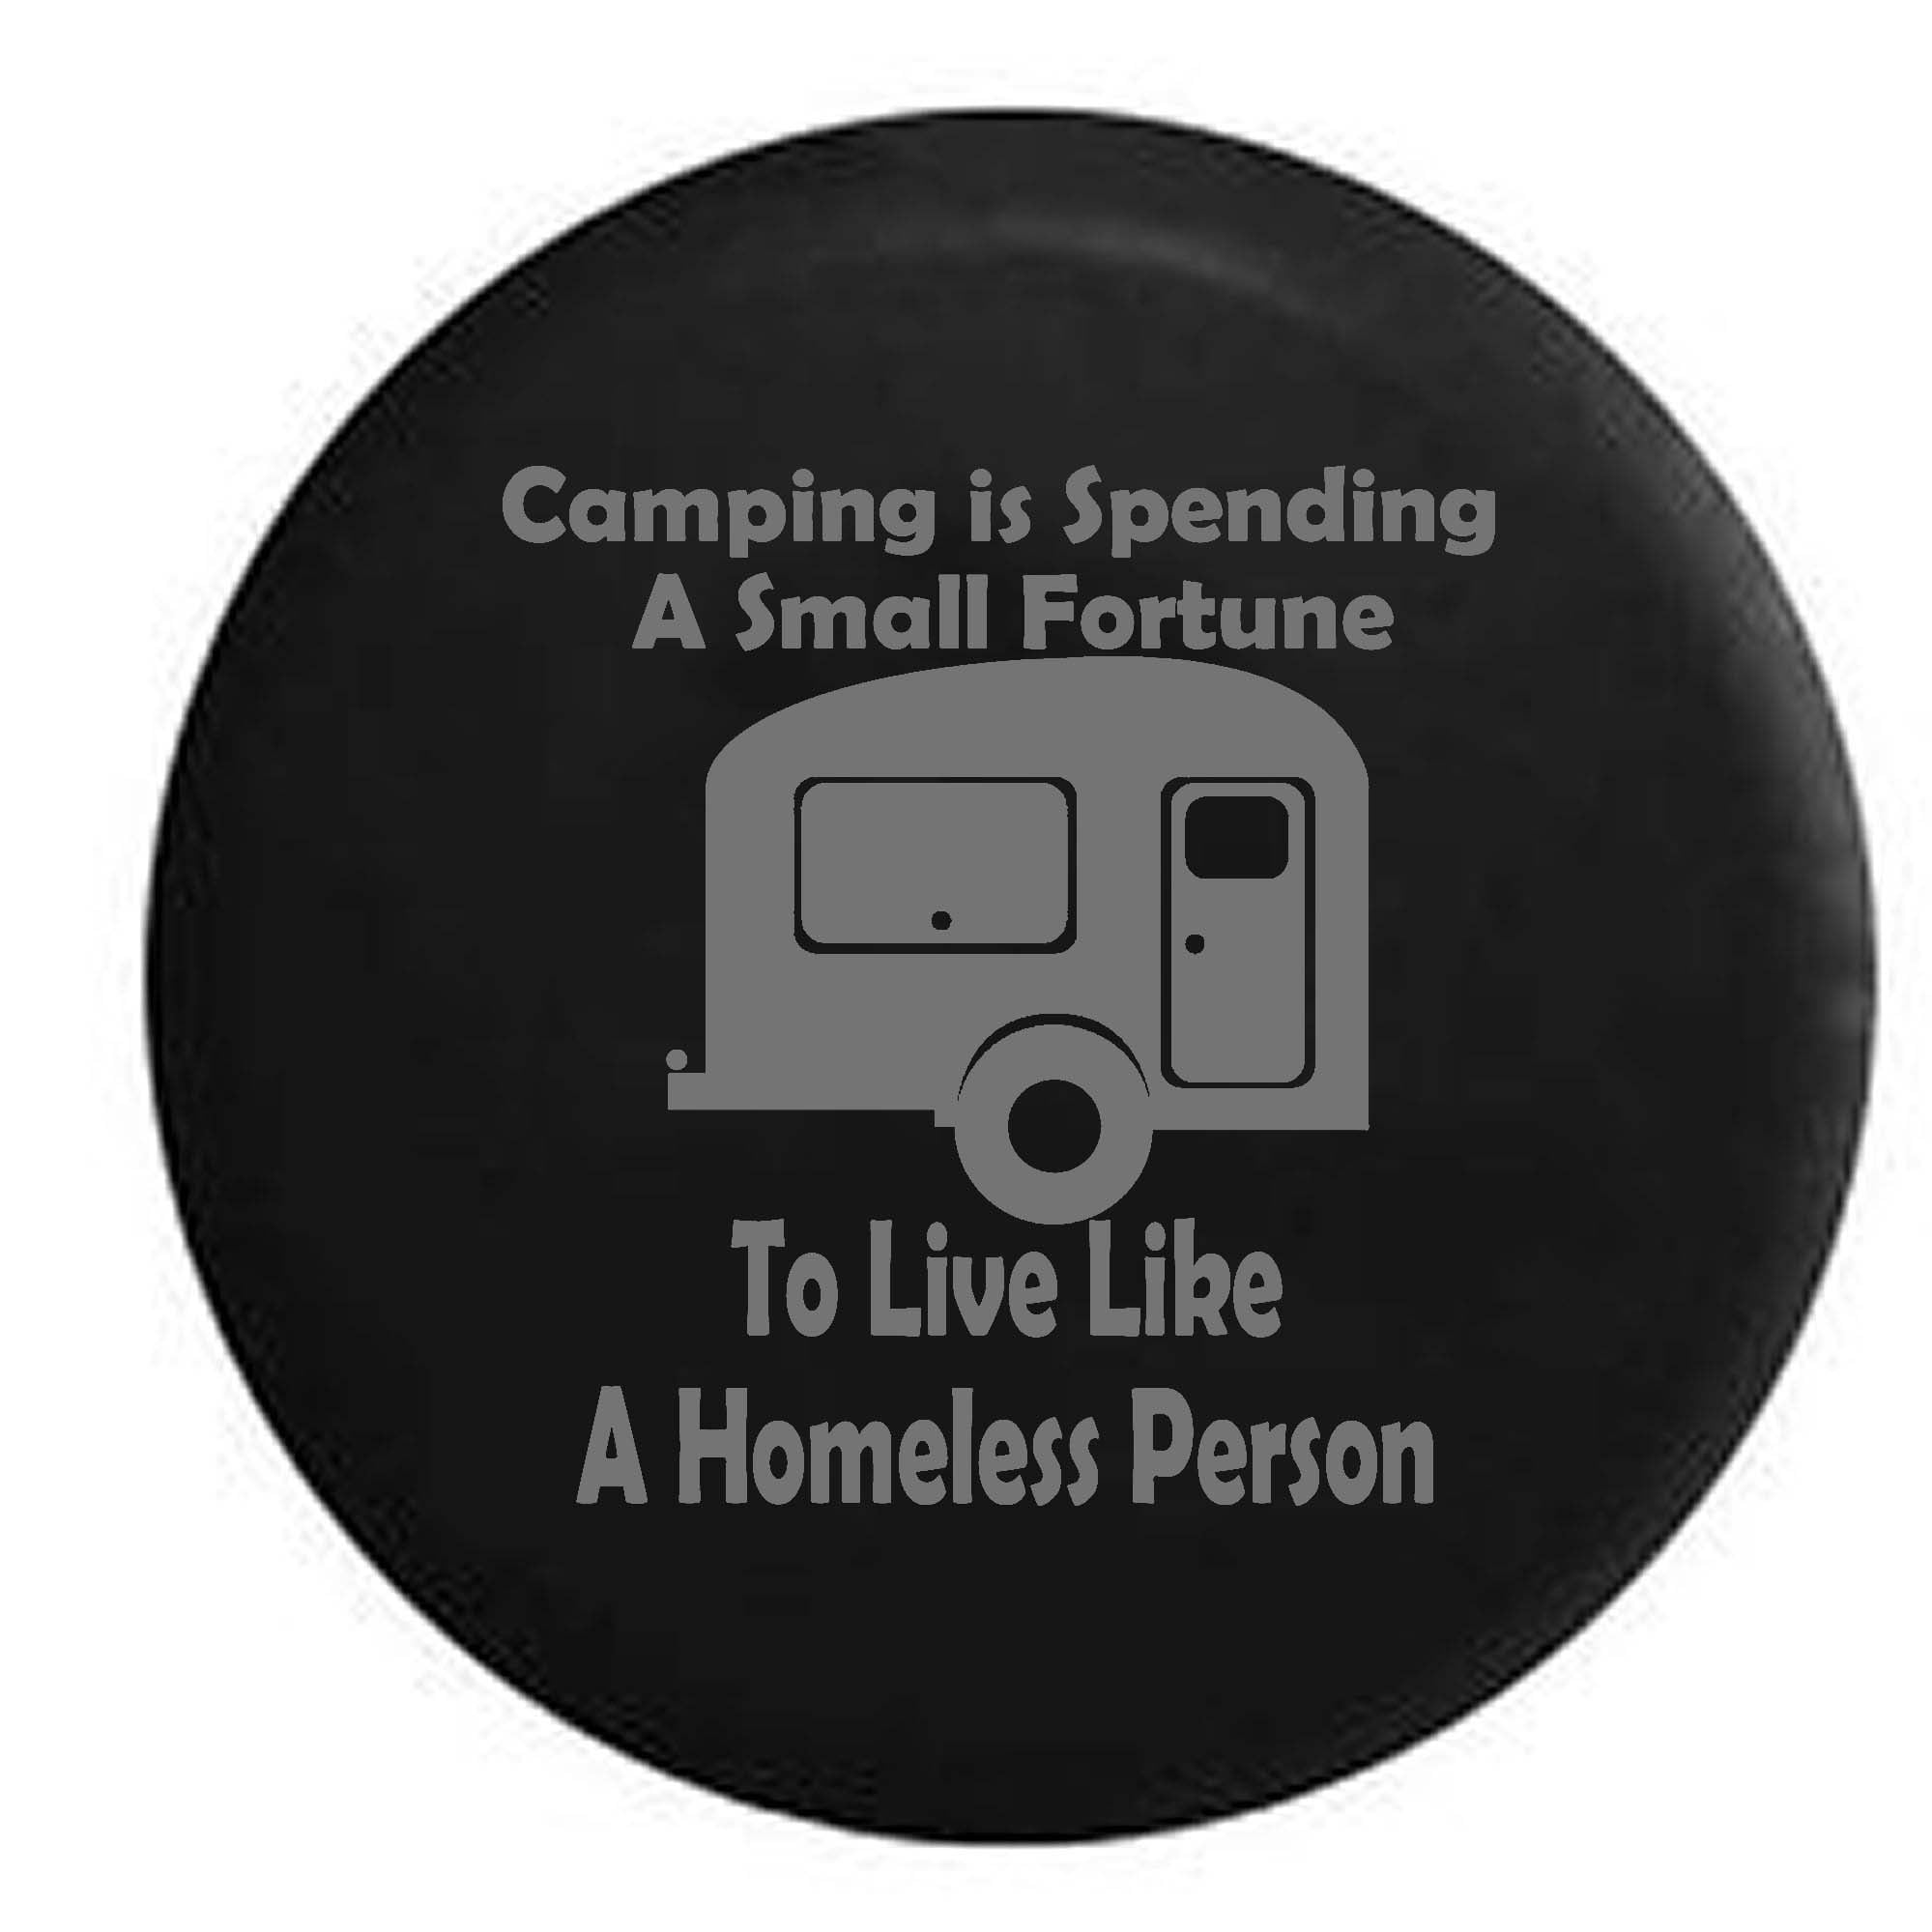 Go Camping RV Camper Travel Spare Tire Cover Black 27.5 in Pike Outdoors Yes I Do Have a Retirement Plan